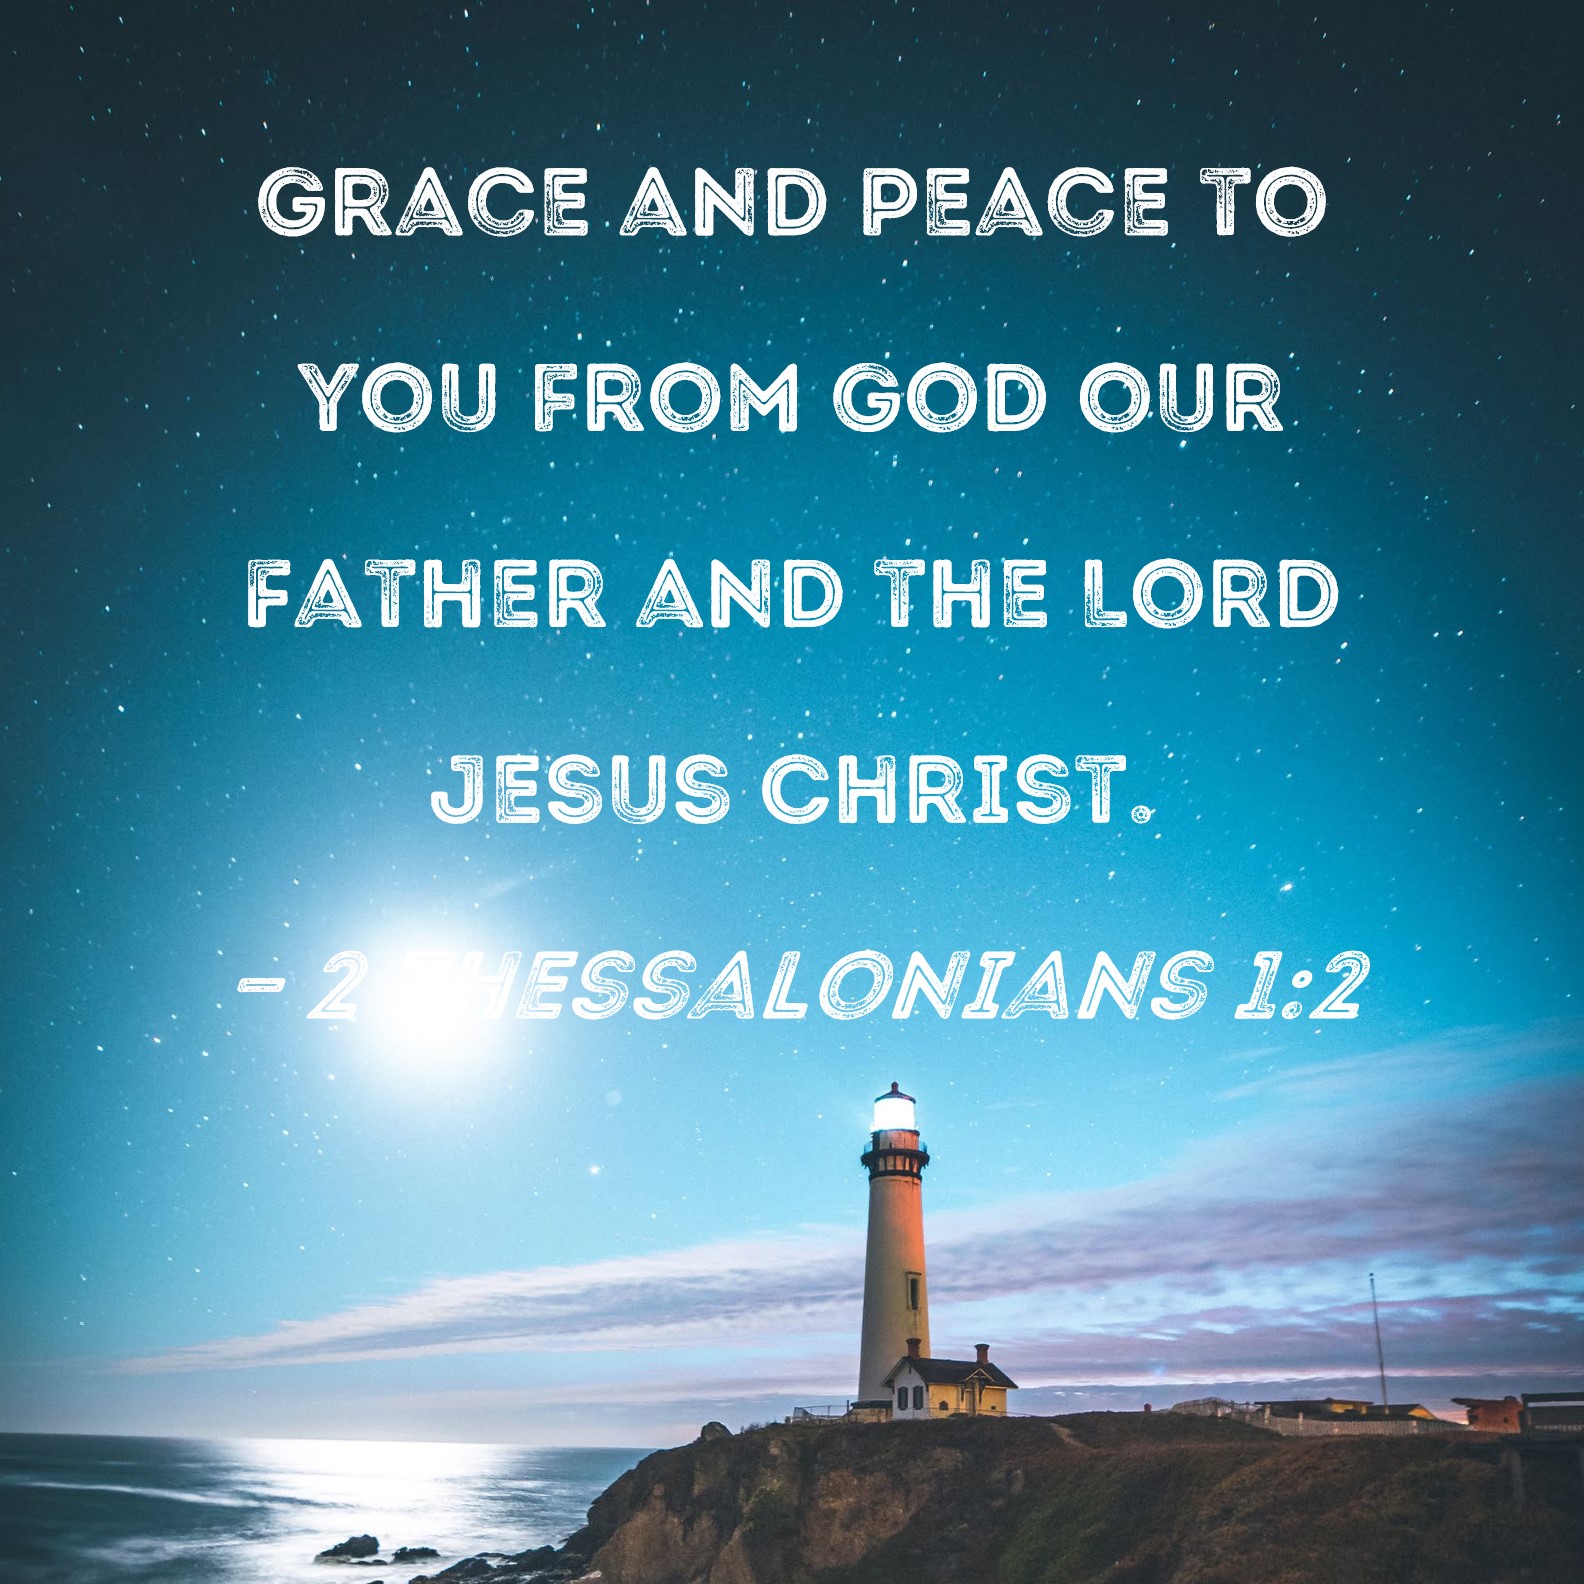 2 Thessalonians 12 Grace and peace to you from God our Father and the